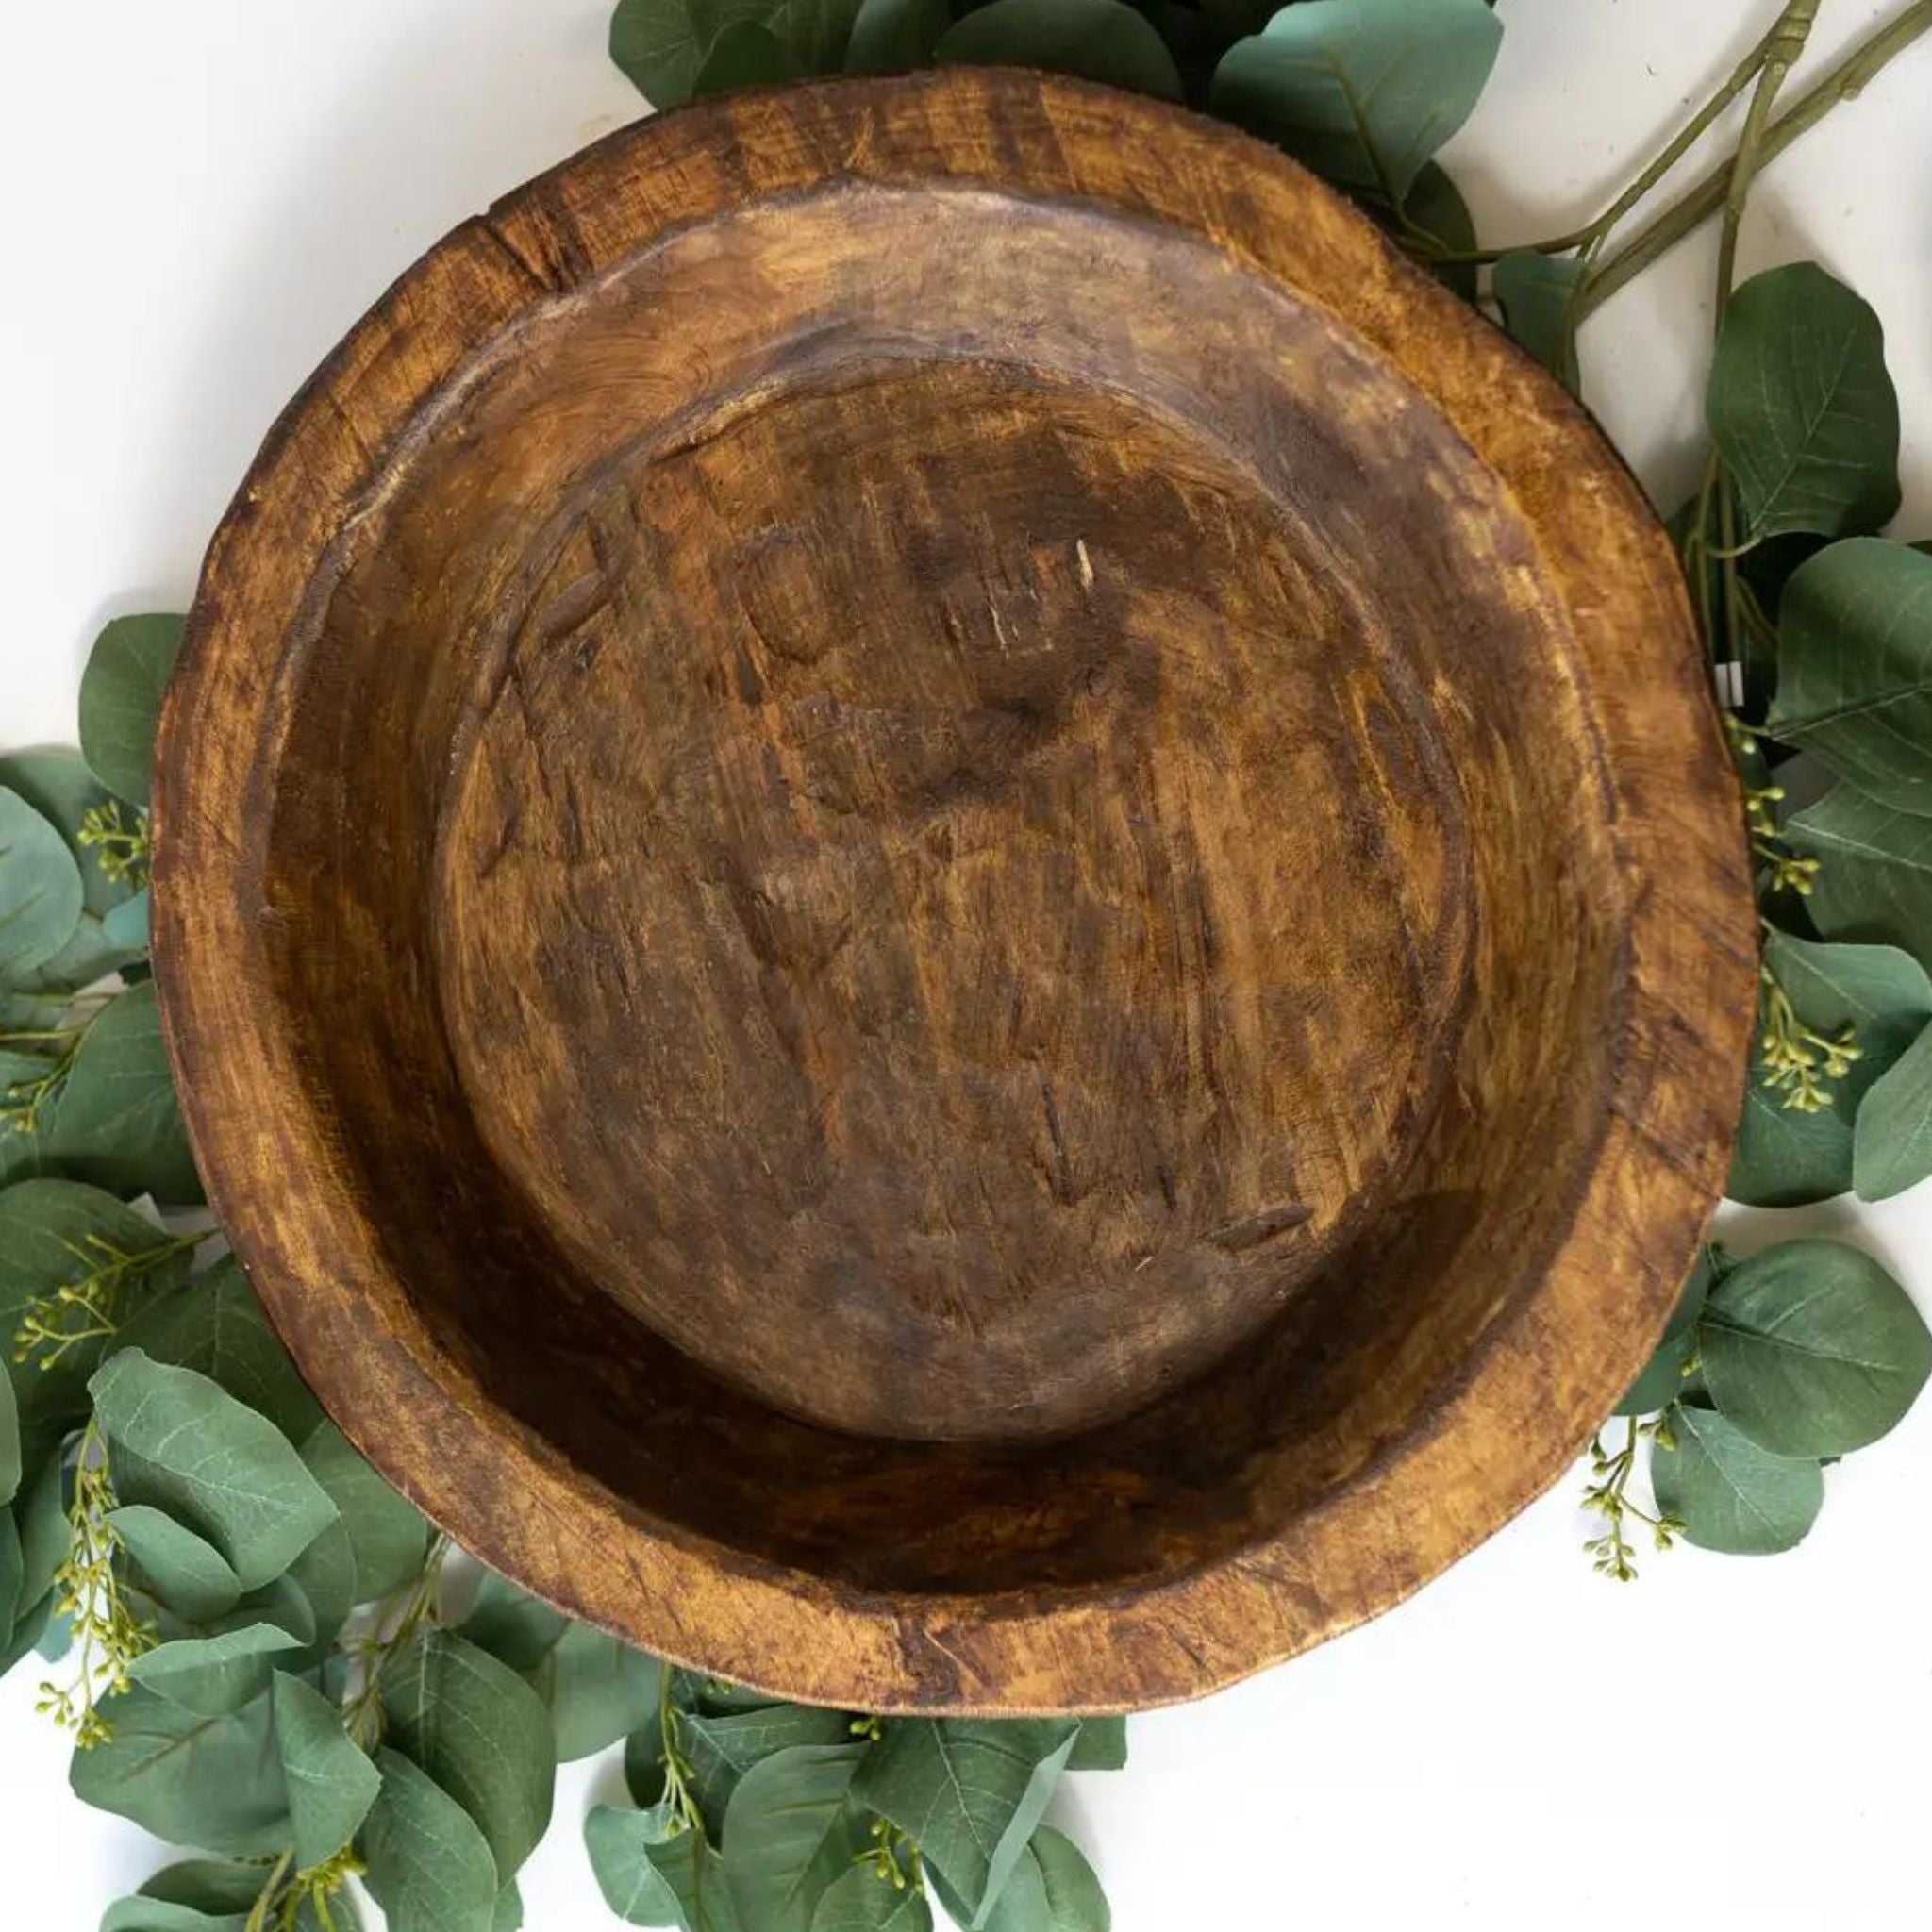 SIMPLY ELEVATED - Introducing the Small Round Carved Bowl, a beautifully handcrafted masterpiece made from Spanish Oak. This exquisite bowl combines traditional craftsmanship with elegant design, resulting in a timeless piece that adds warmth and sophistication to any space.